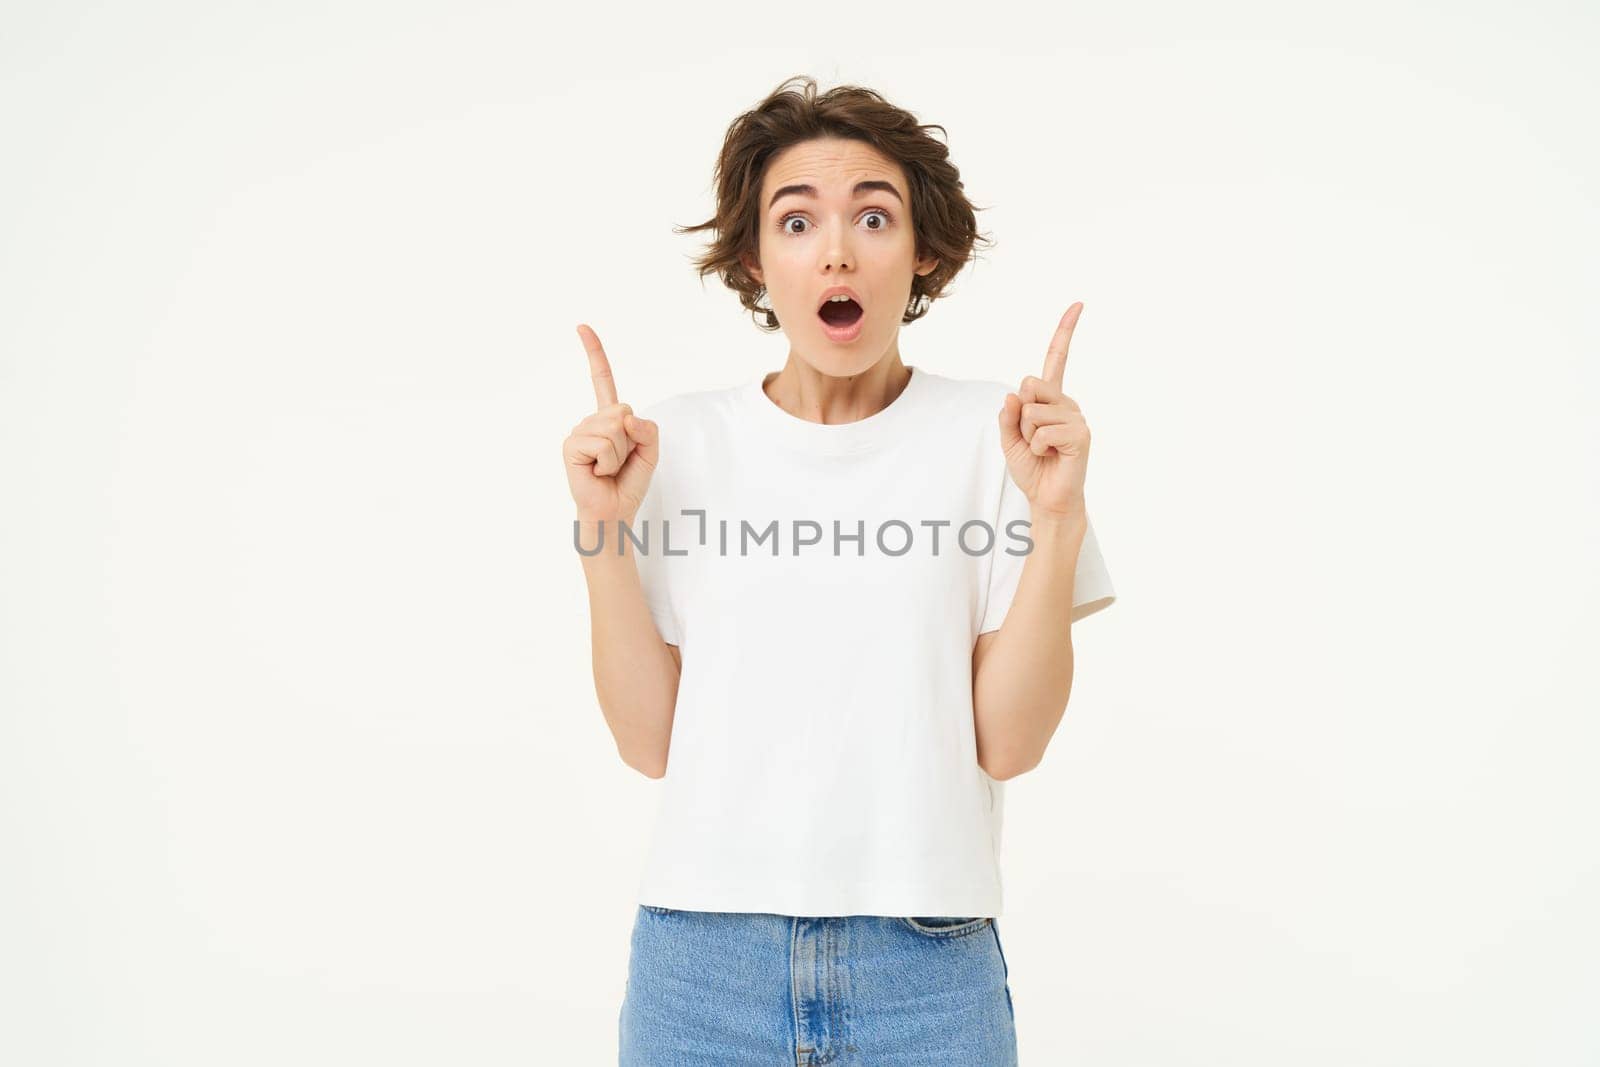 Image of brunette woman pointing fingers up, showing advertisement, gasping and looking amazed, saying wow, impressed by offer, standing over white background.